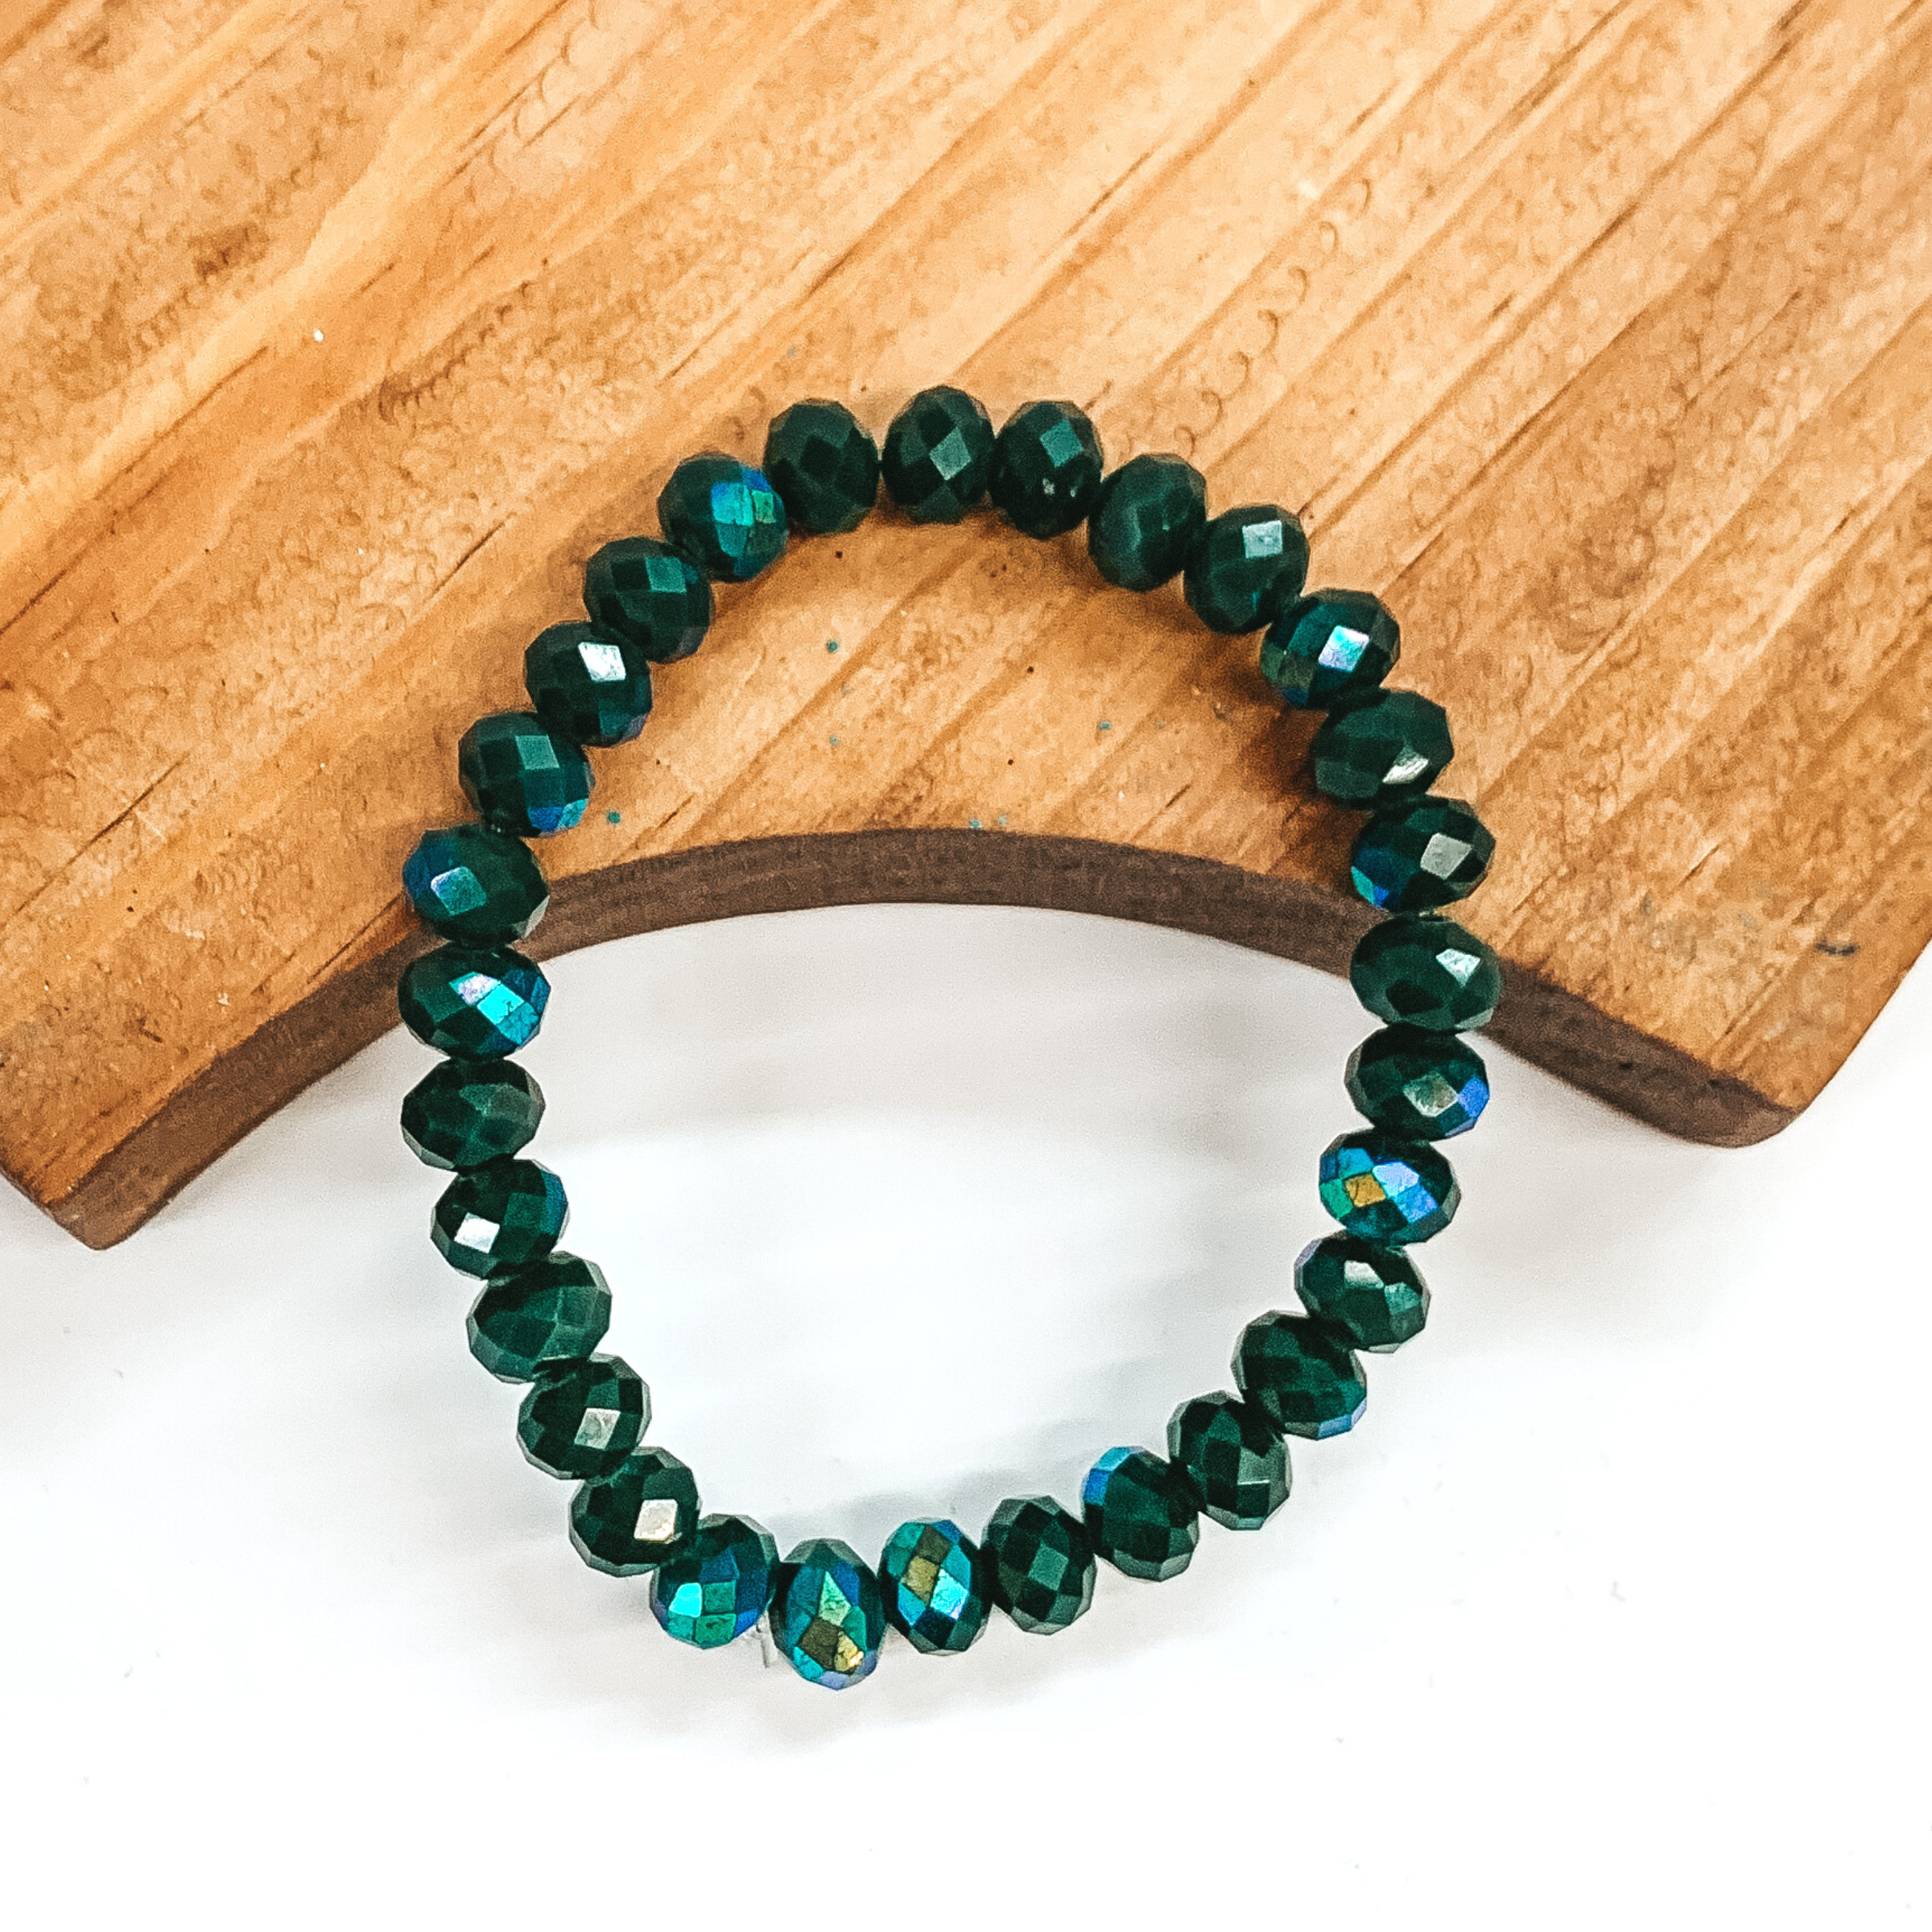 Hunter green AB crystal beaded bracelet. This bracelet is pictured laying partially on a brown block on a white background.